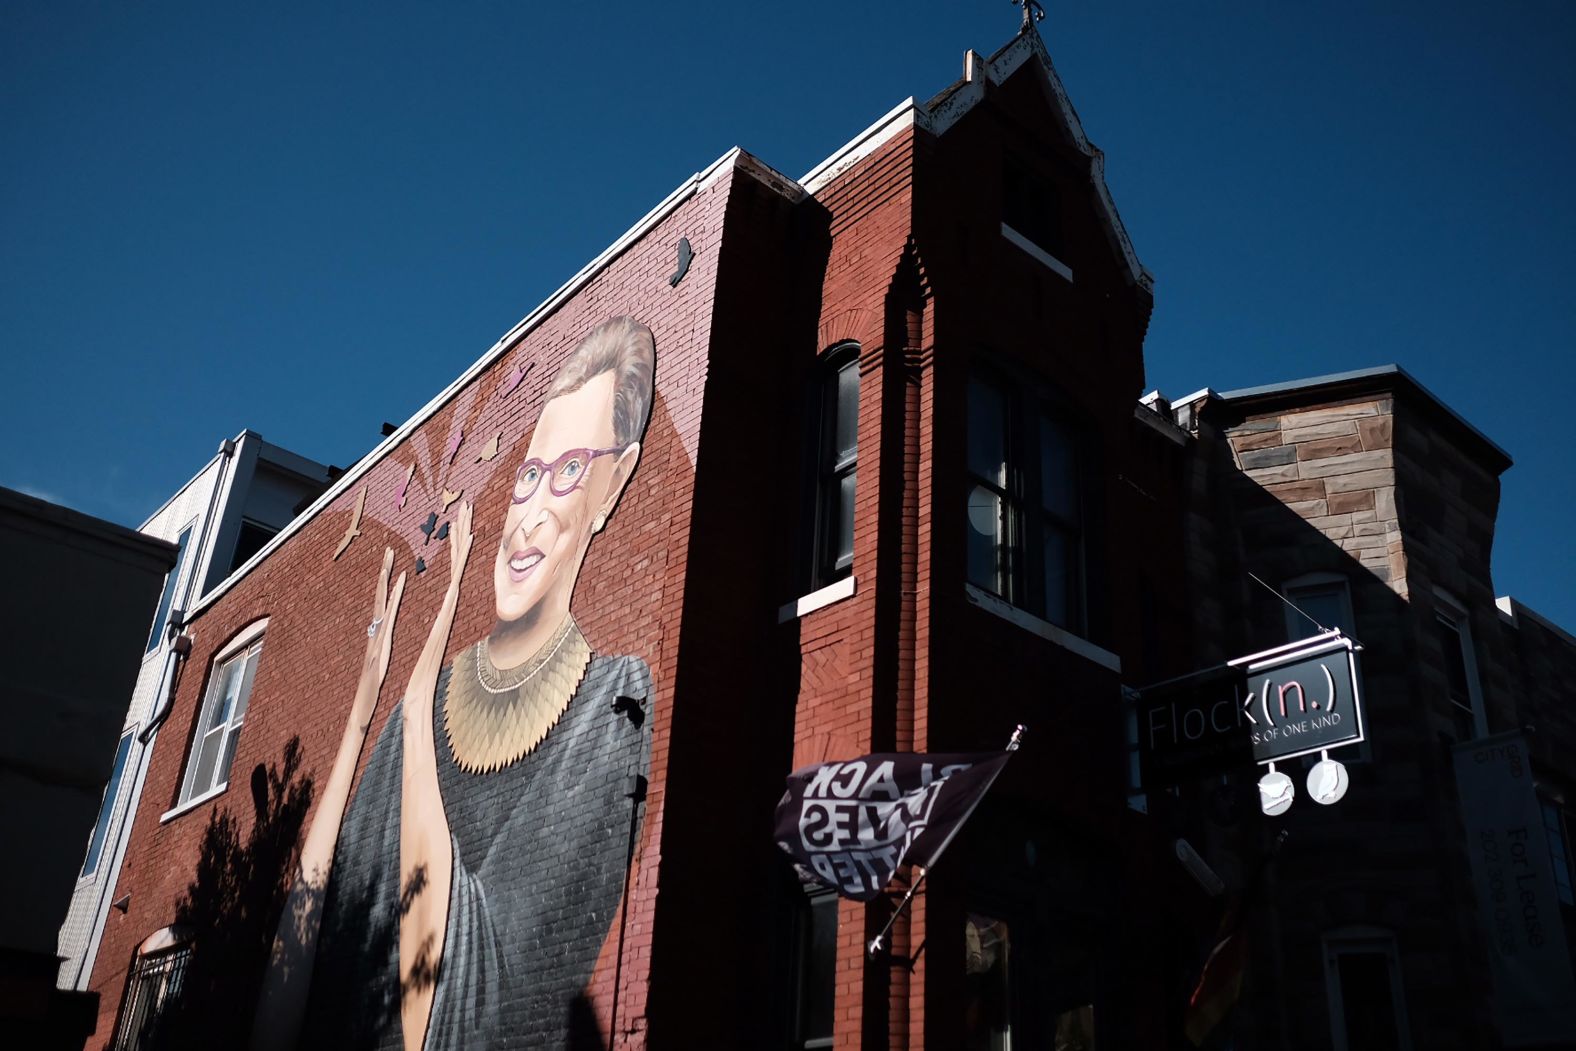 A mural of Ginsburg is seen on historic U Street in Washington, DC. Rose Jaffe, a local artist in Washington, <a href="index.php?page=&url=https%3A%2F%2Fwww.cnn.com%2F2019%2F09%2F17%2Fpolitics%2Fruth-bader-ginsburg-mural-dc%2Findex.html" target="_blank">was asked by the company Flock DC</a> to paint the mural on the side of its building in September 2019.